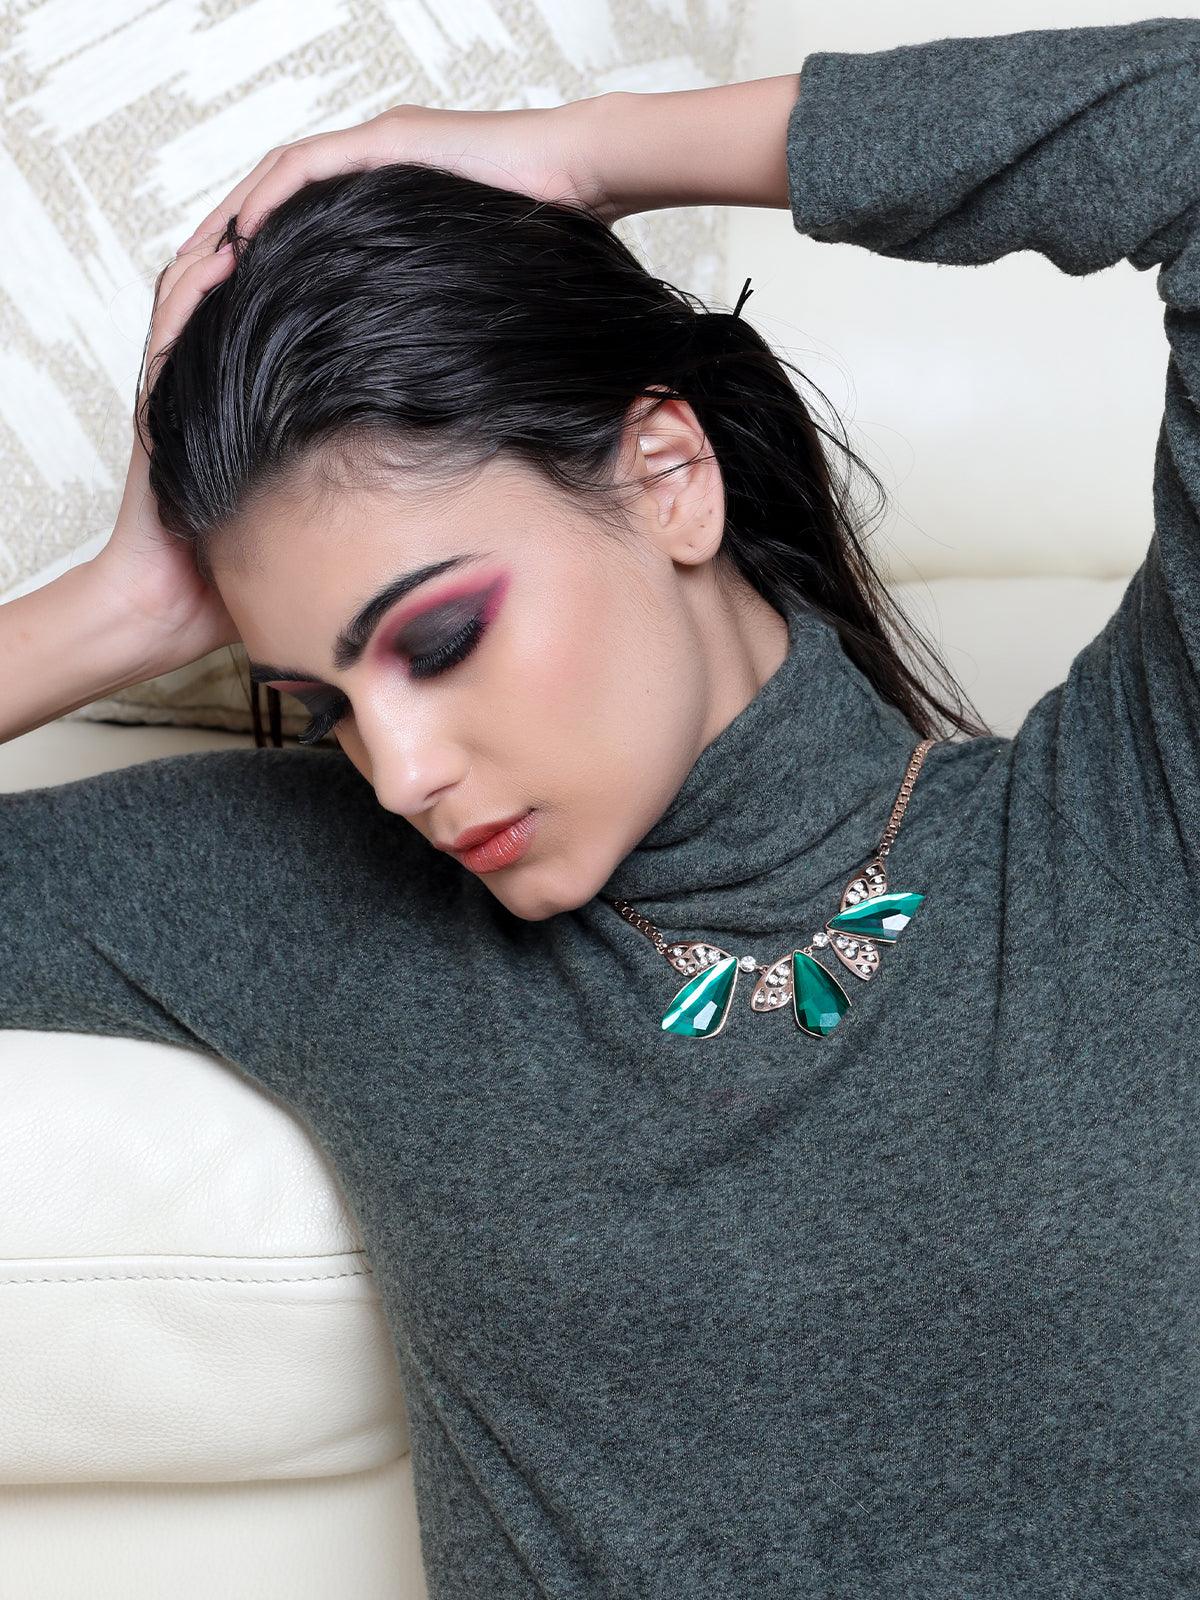 Turquoise princess necklace - Odette